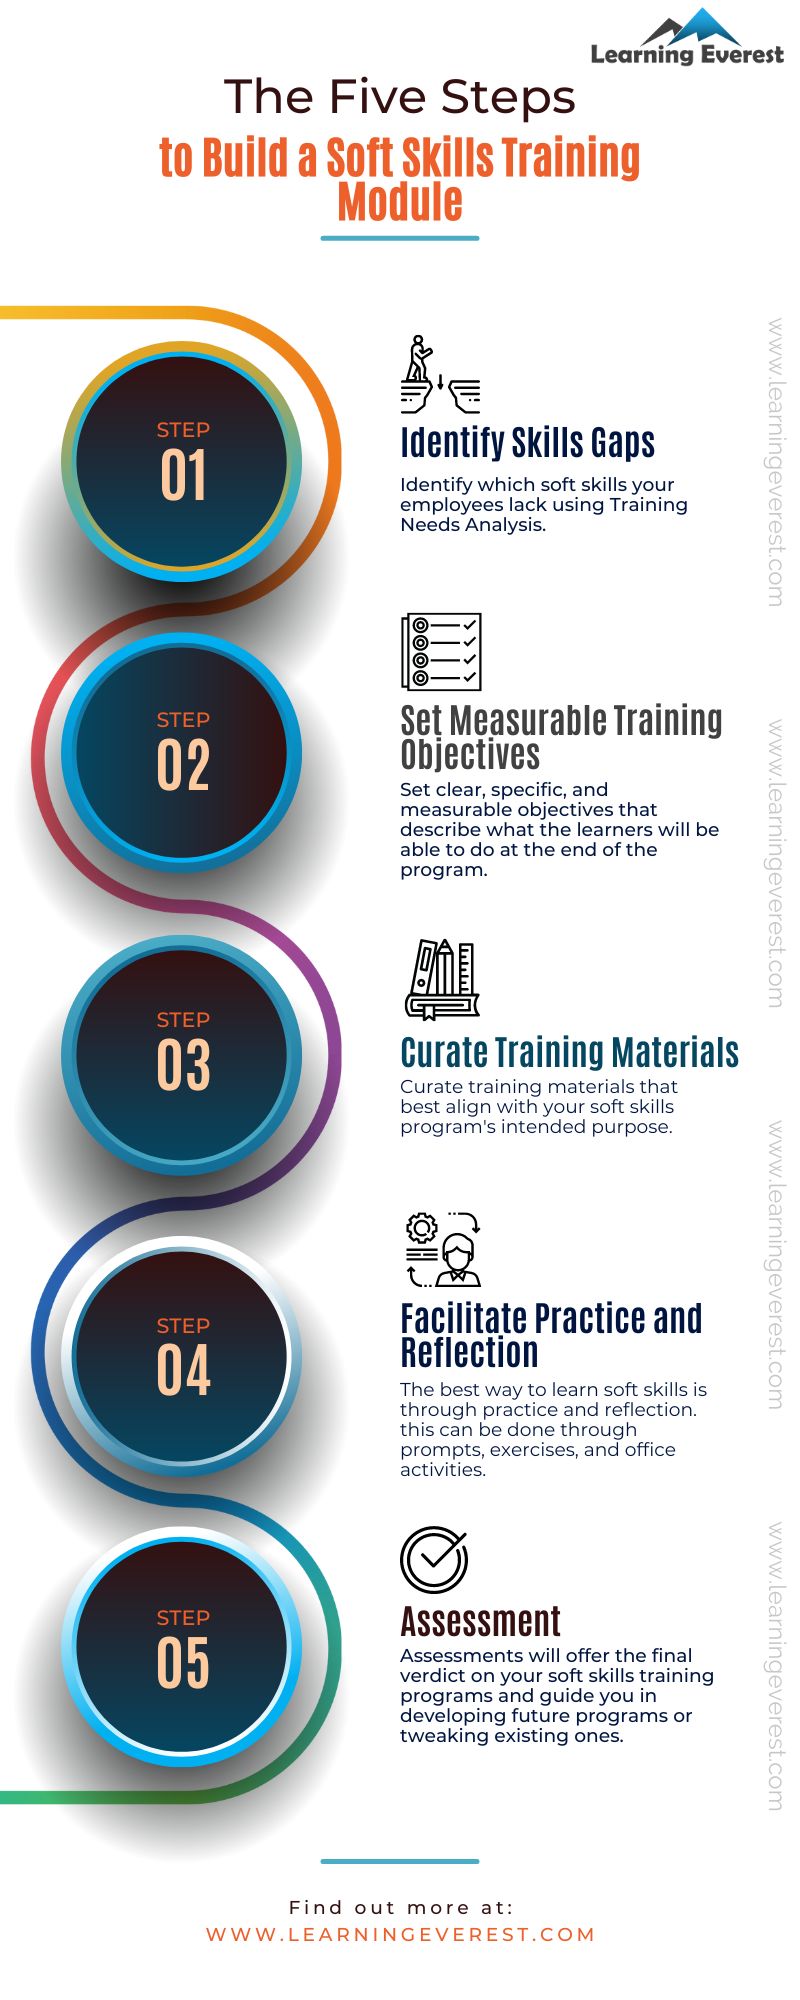 An Essential Guide to Building Soft Skills eLearning Module - Infograhic